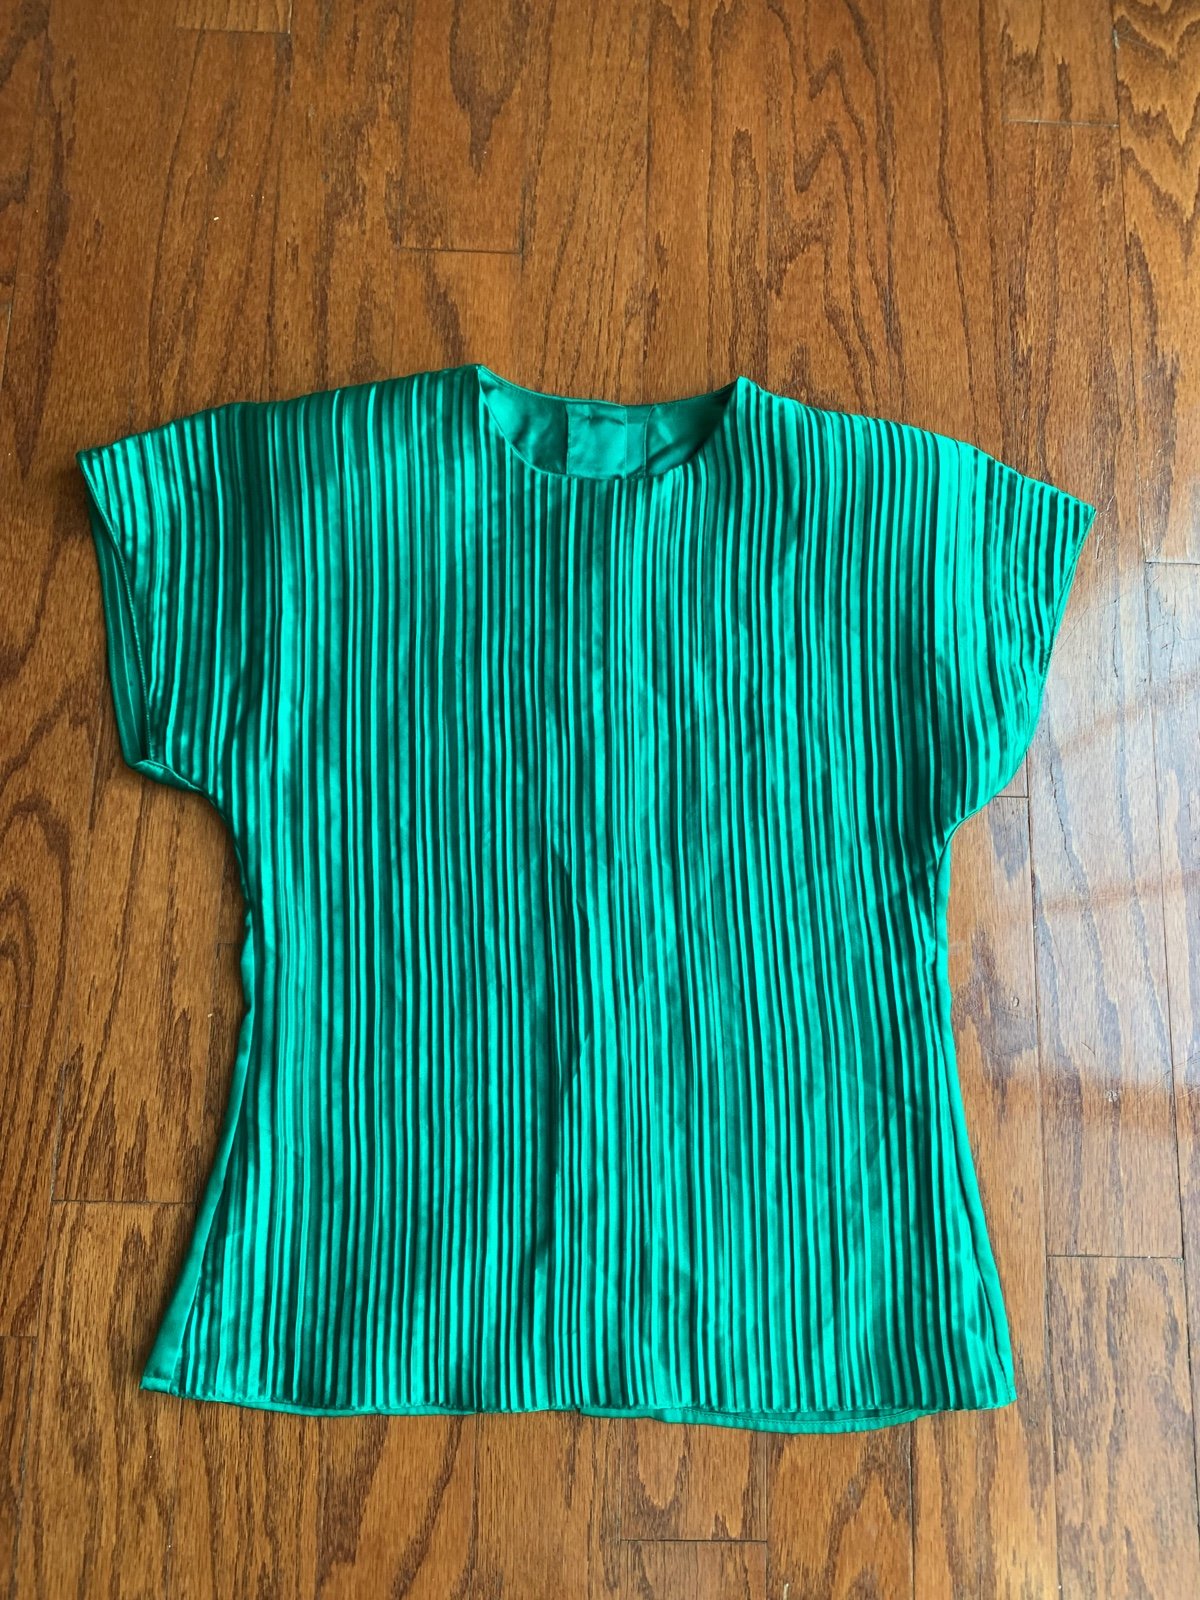 good price San Andre Green Back Button Down Blouse Size 4 fJClxCDZs online store